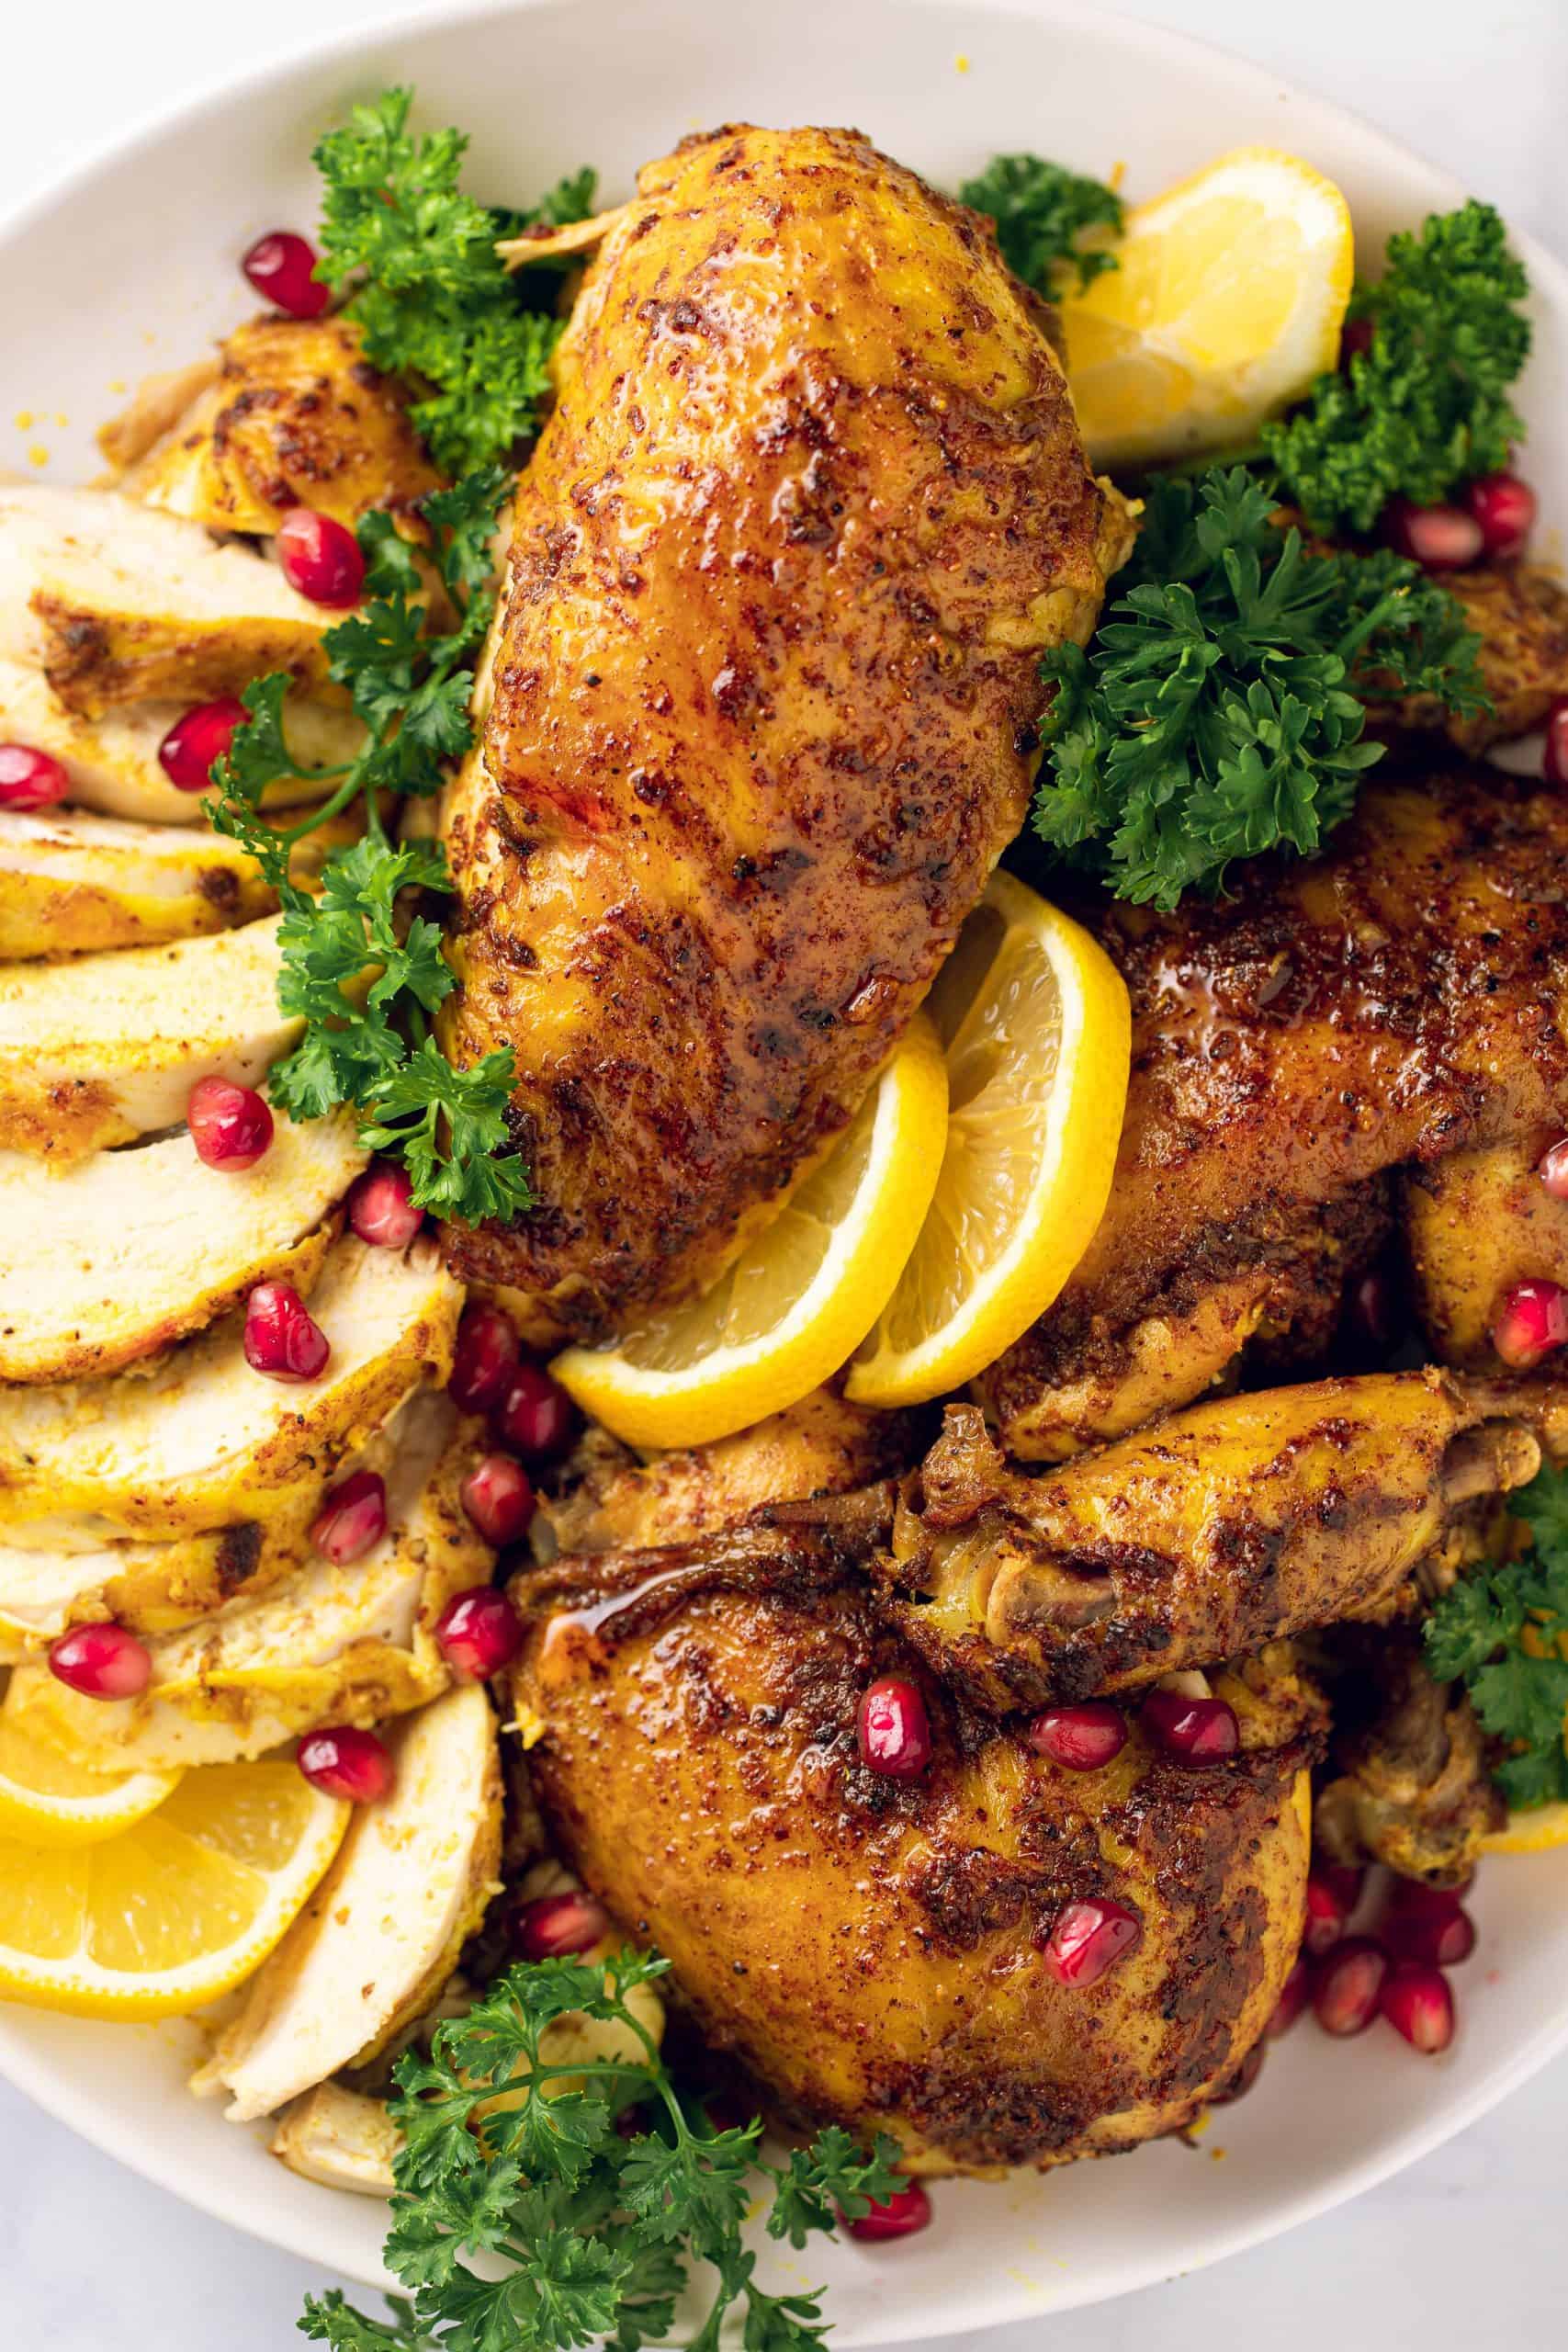 Marco photo of roasted chicken with parsely, lemon, & pomegranate